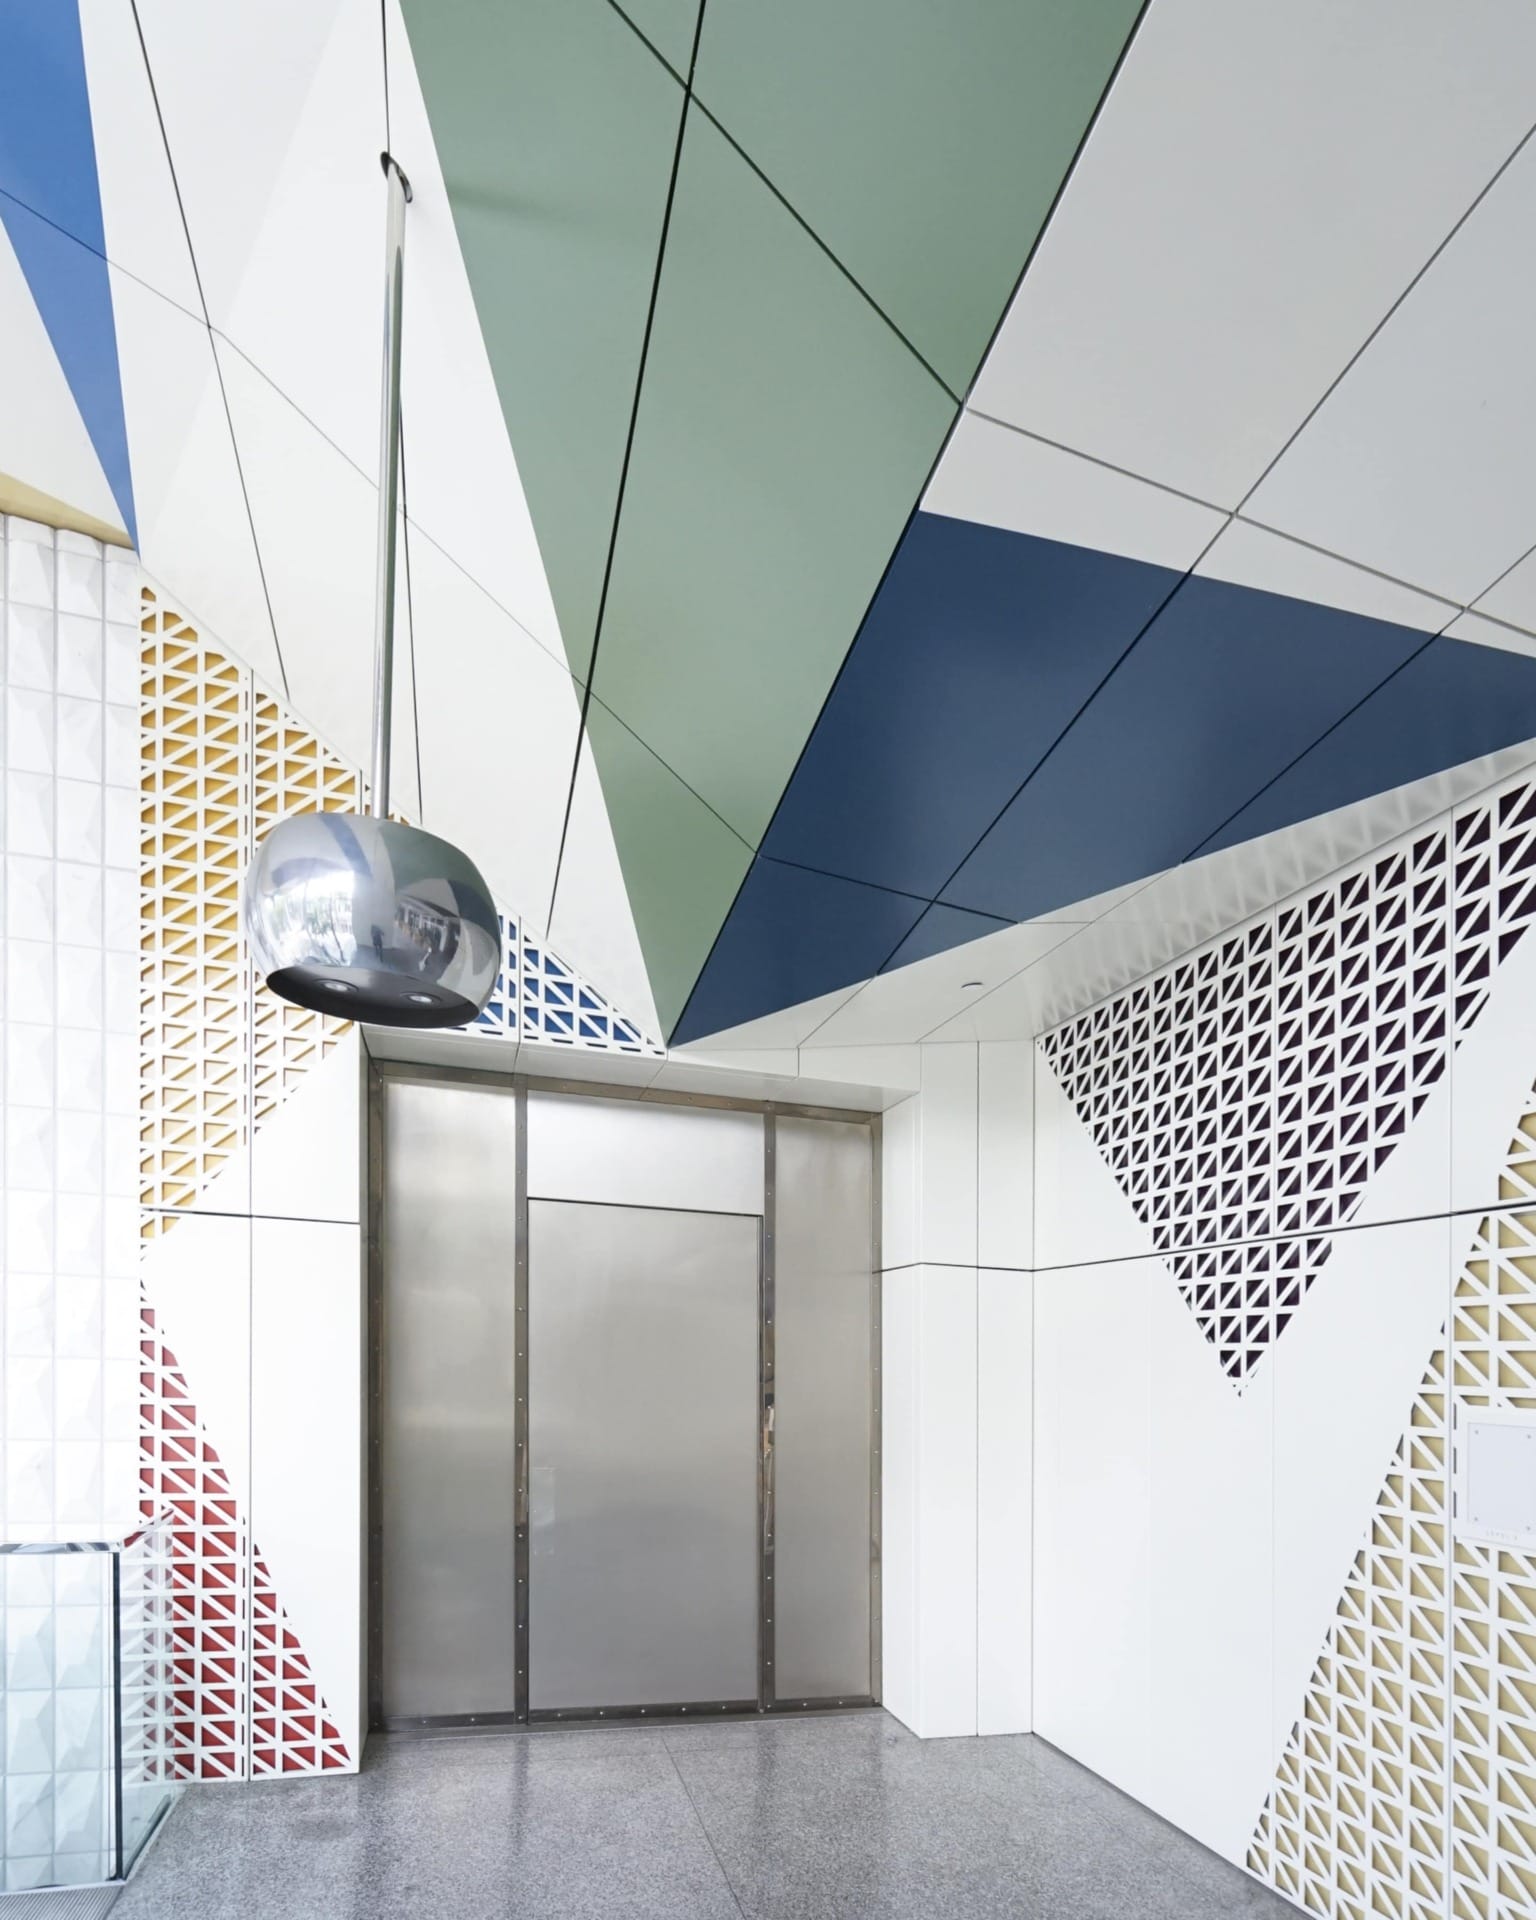 The triangular design motif that is rendered through painted aluminum on the soffit system continues into the wall system, which is rendered via perforated metal wall panels.